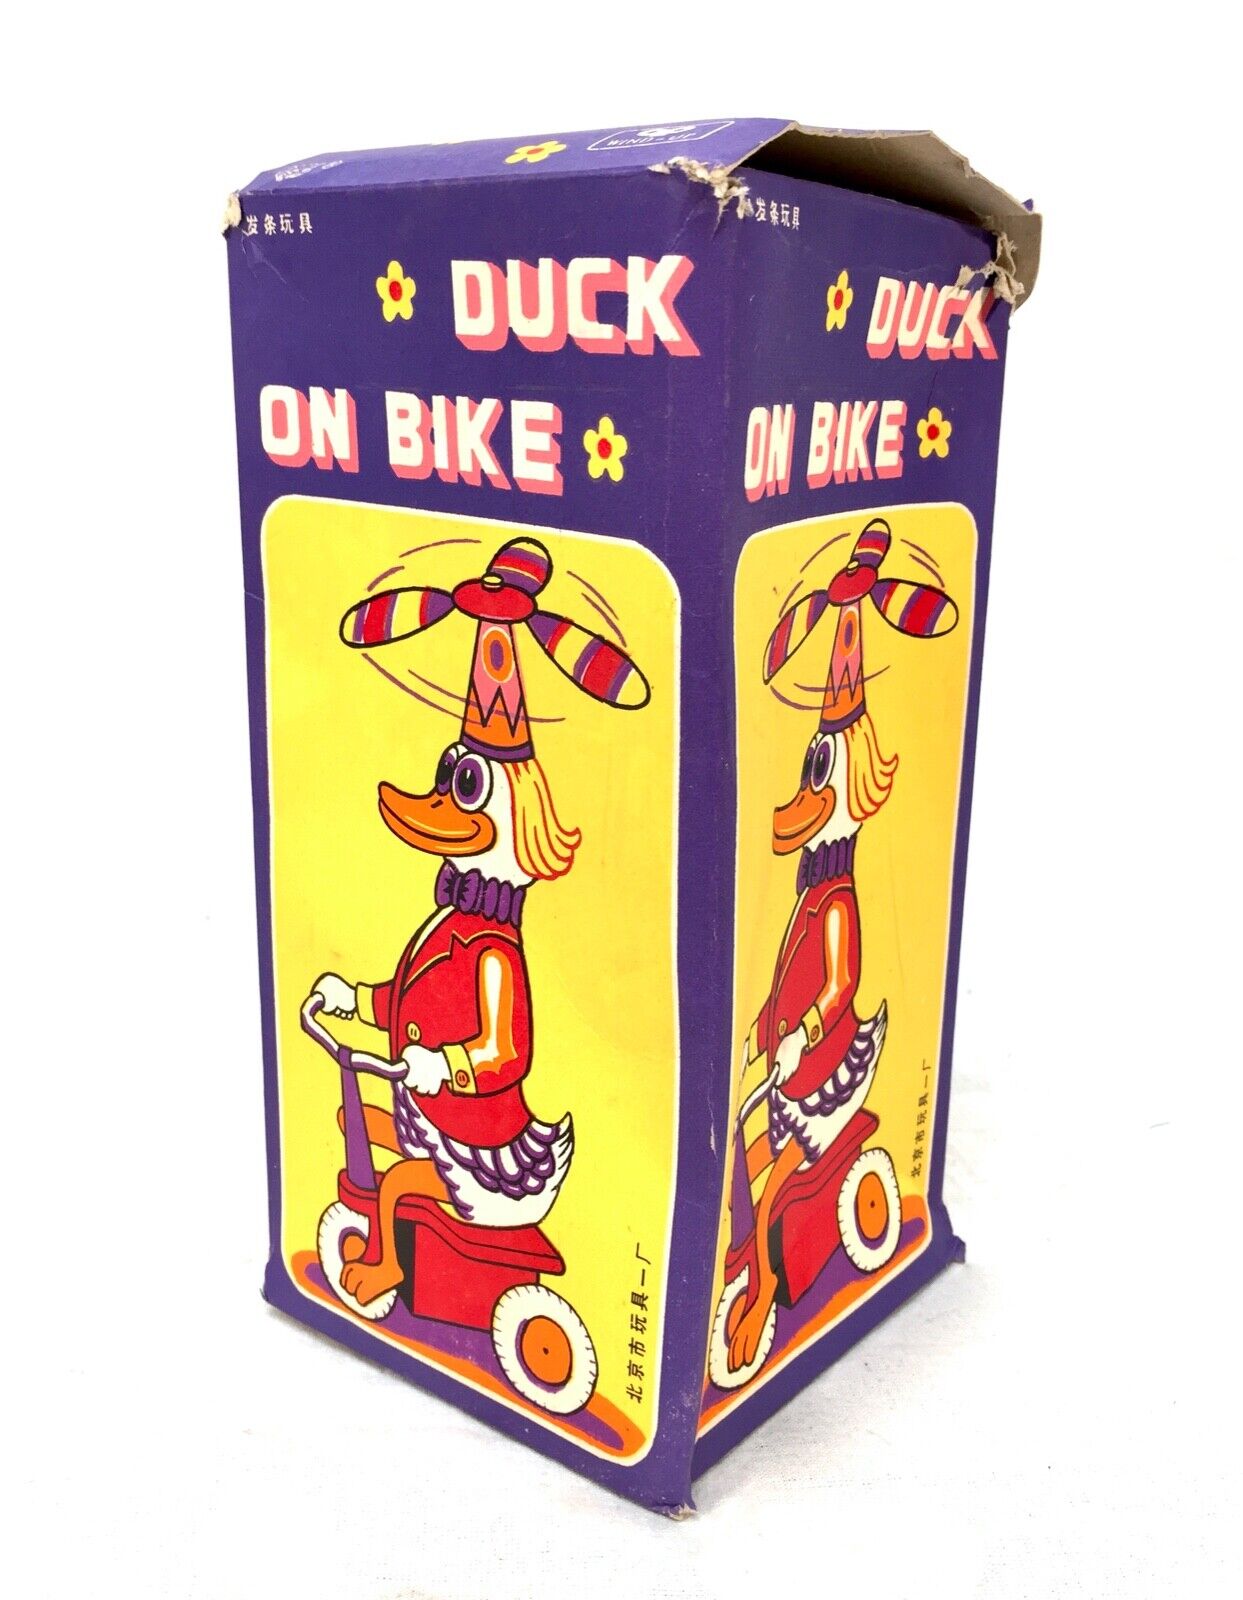 Vintage Wind-up Clockwork Tin Mechanical Wind-Up Duck on a Bike Toy / Boxed